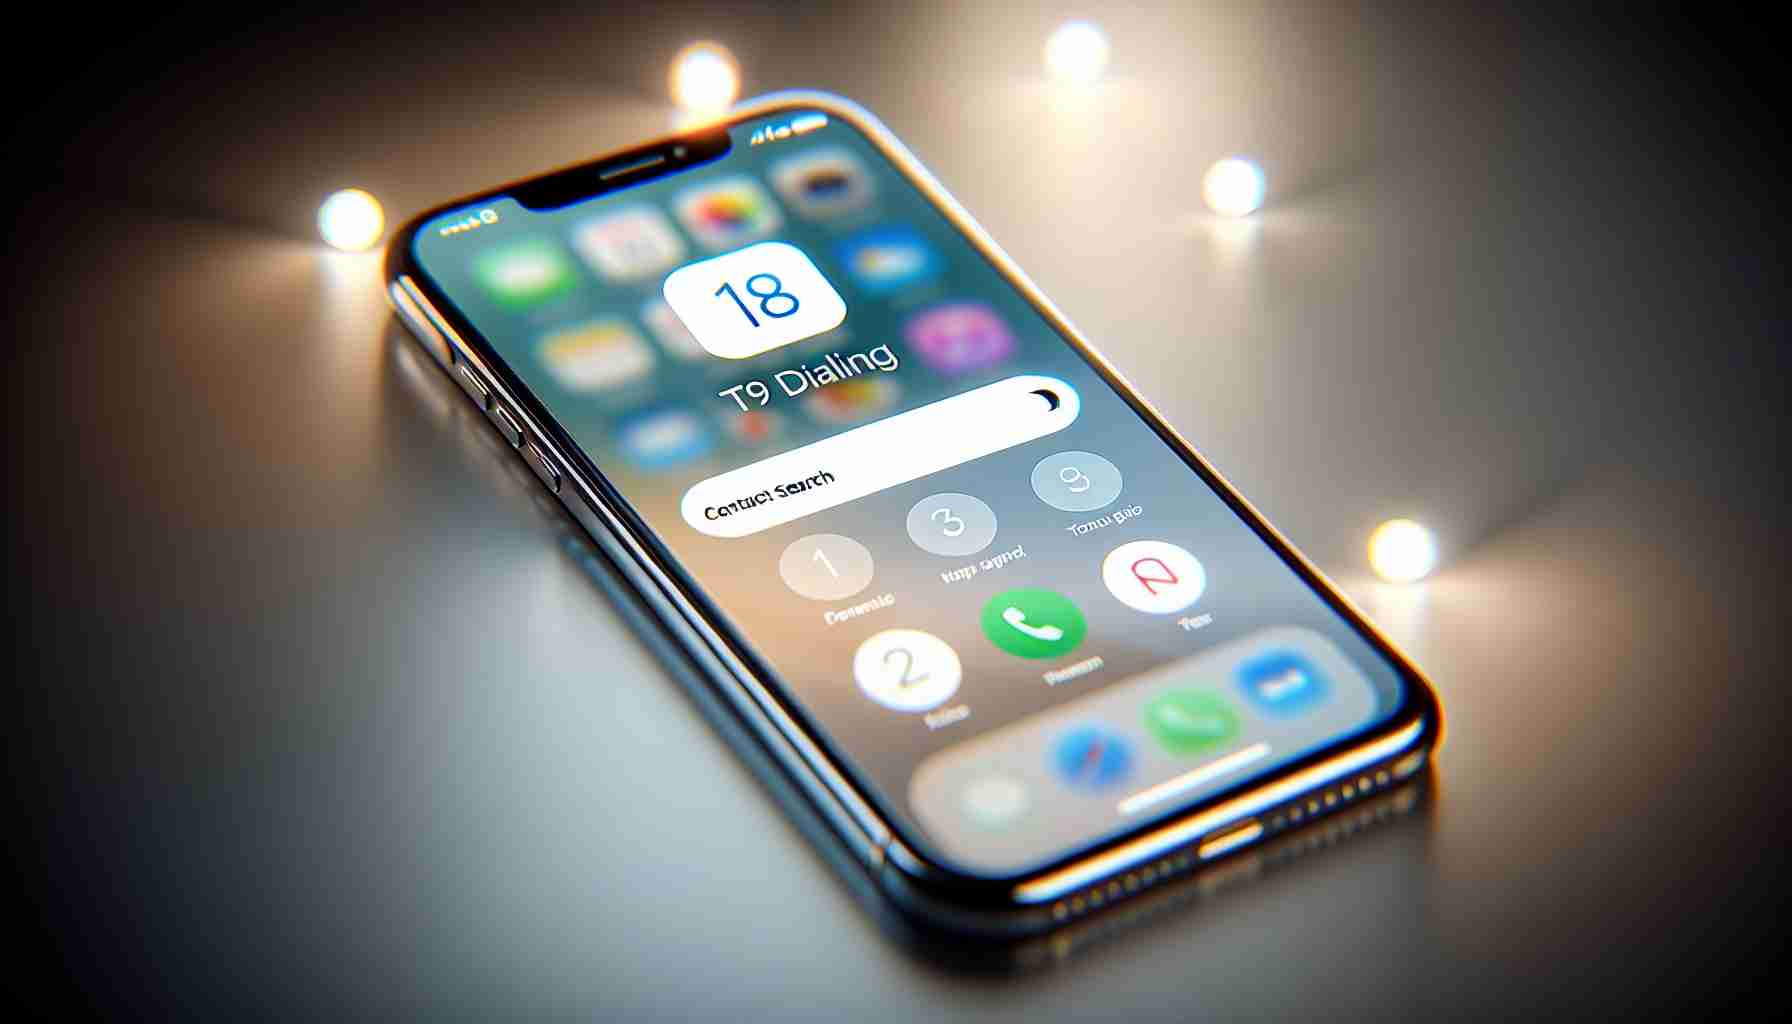 Revolutionizing Contact Search: T9 Dialing Makes Its Debut on iPhone with iOS 18